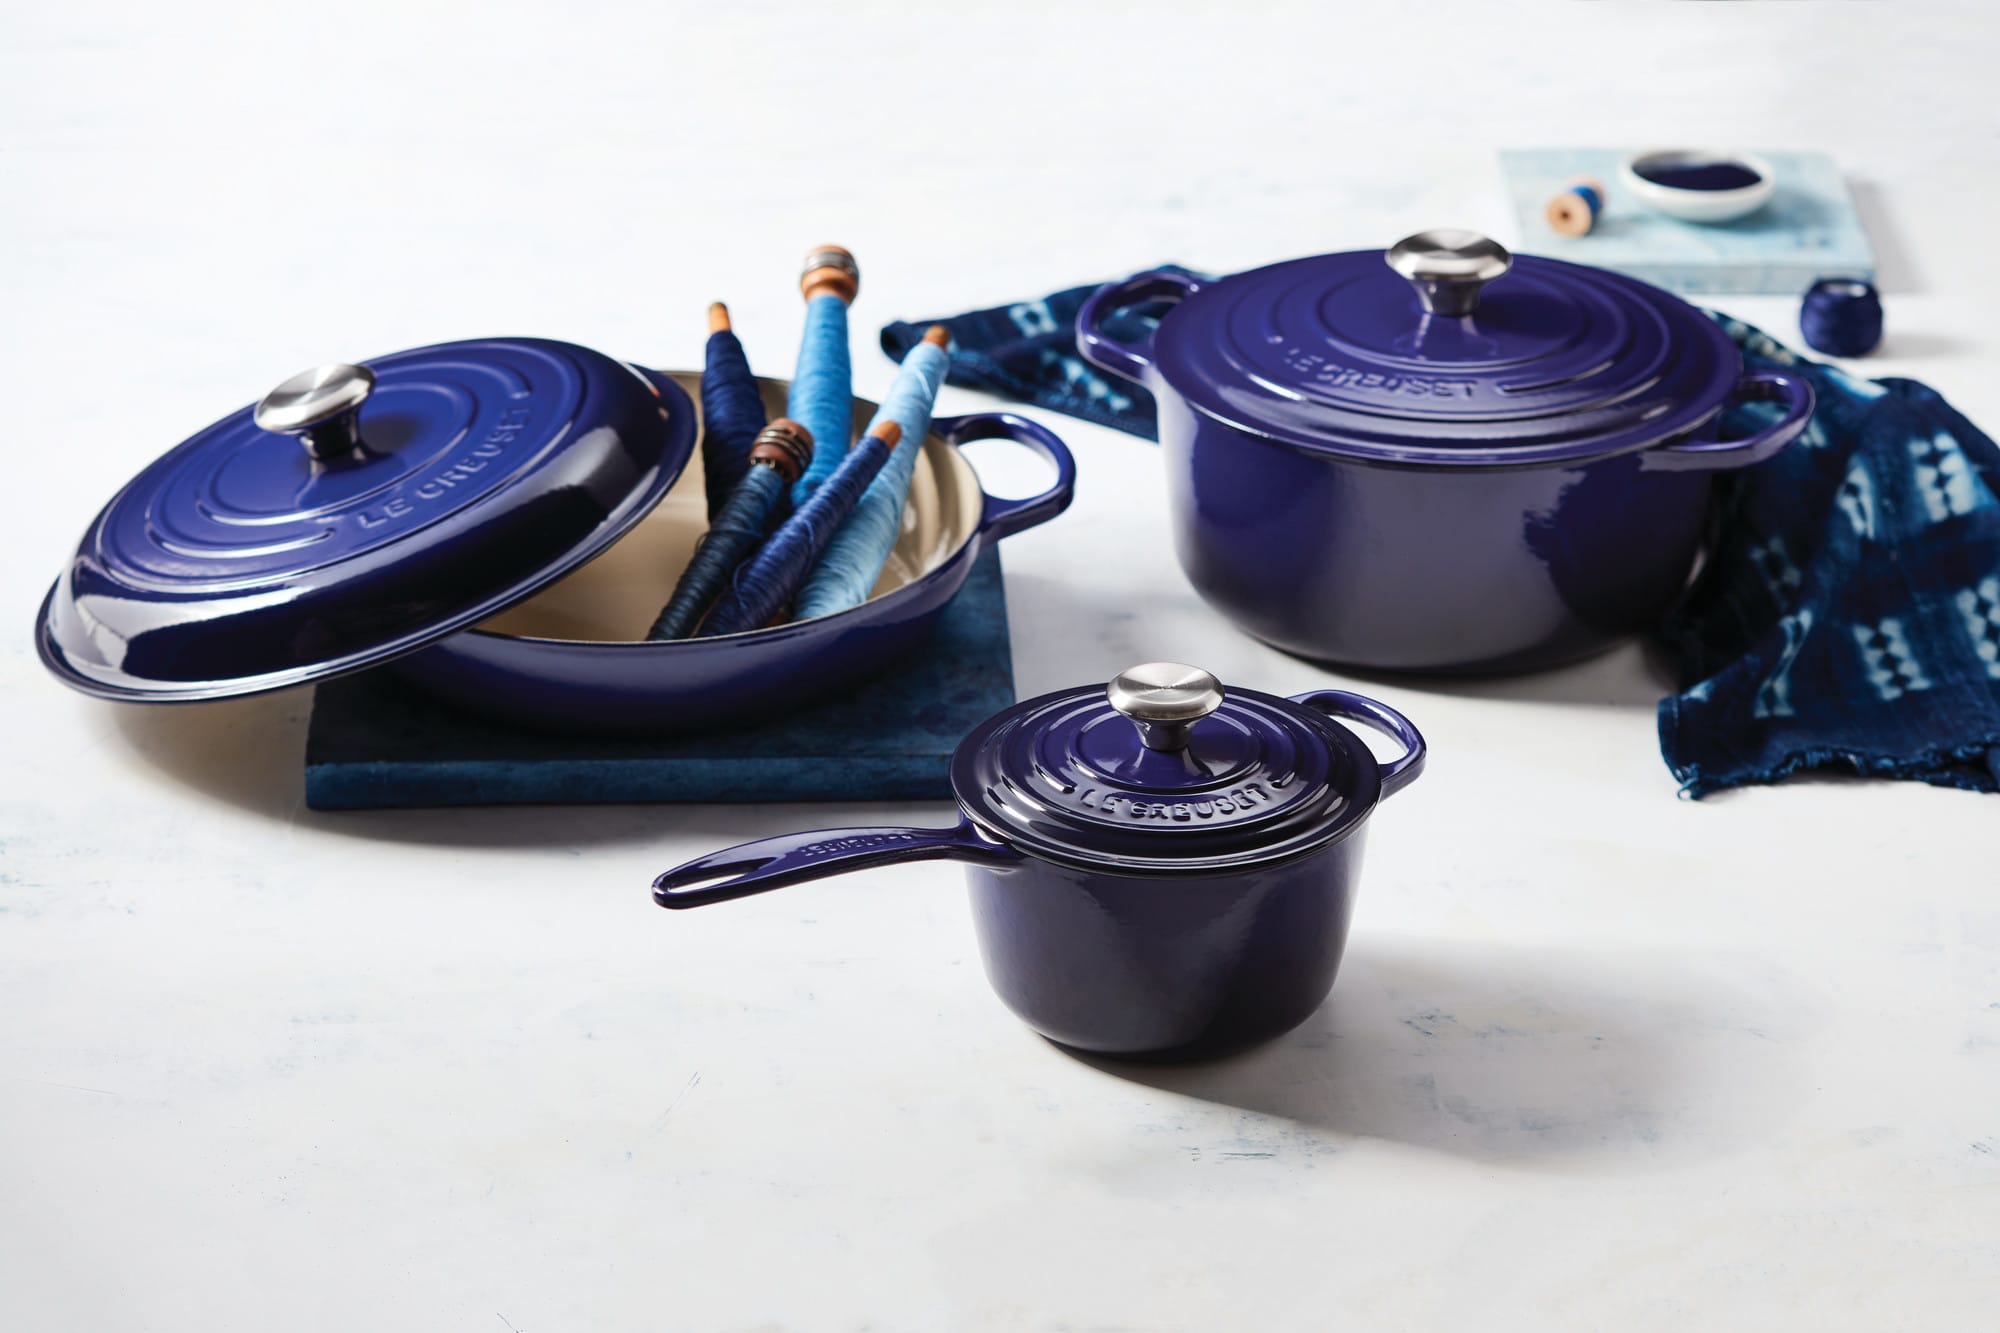 Indigo is the latest color making an exit : r/LeCreuset